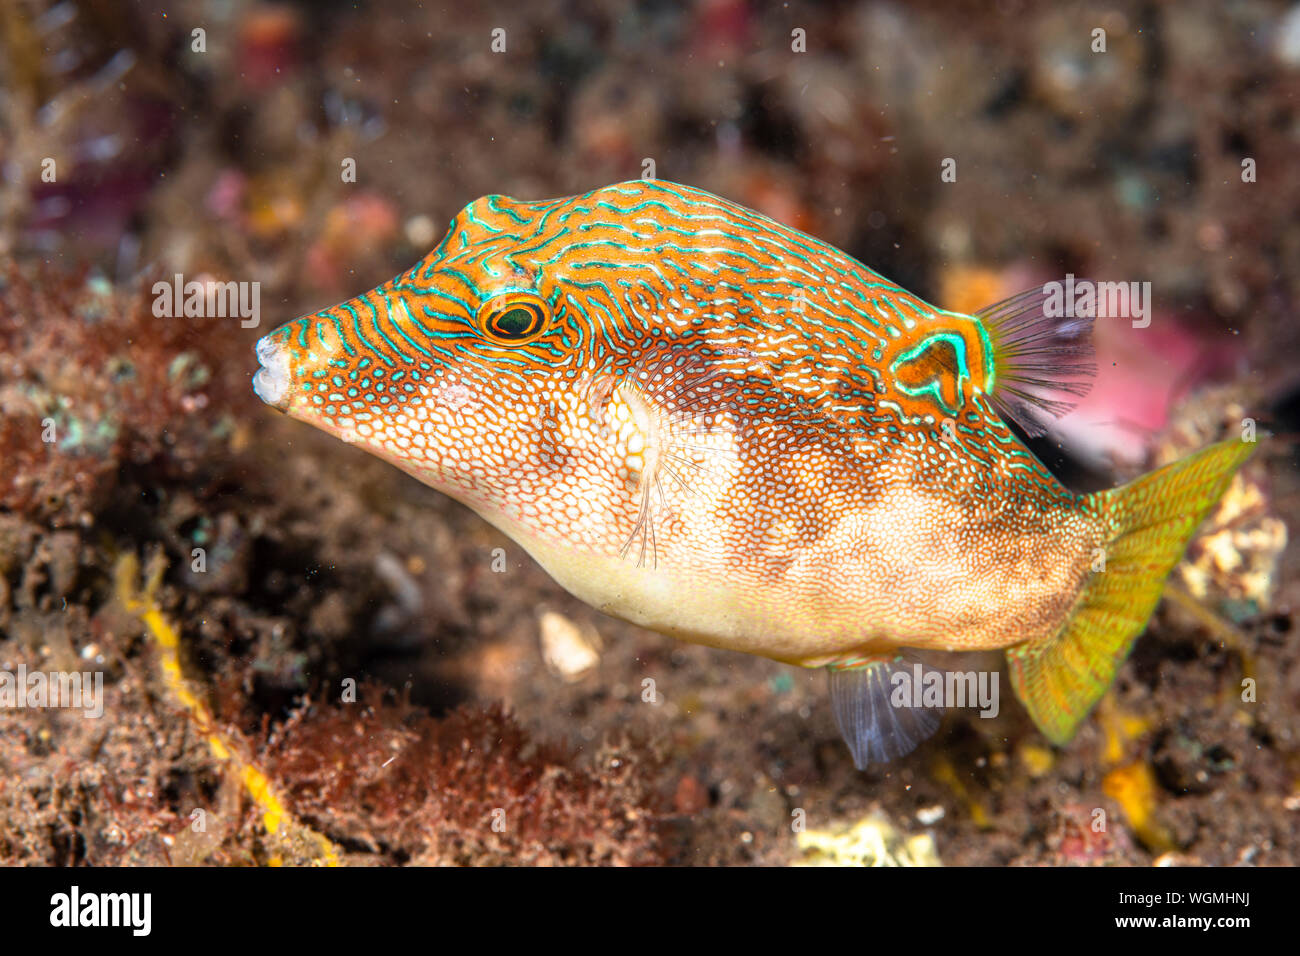 A small fish called fingerprint toby, or compressed toby, inhabits the shallow waters of Indonesia and exhibits colorful striations of green, orange a Stock Photo